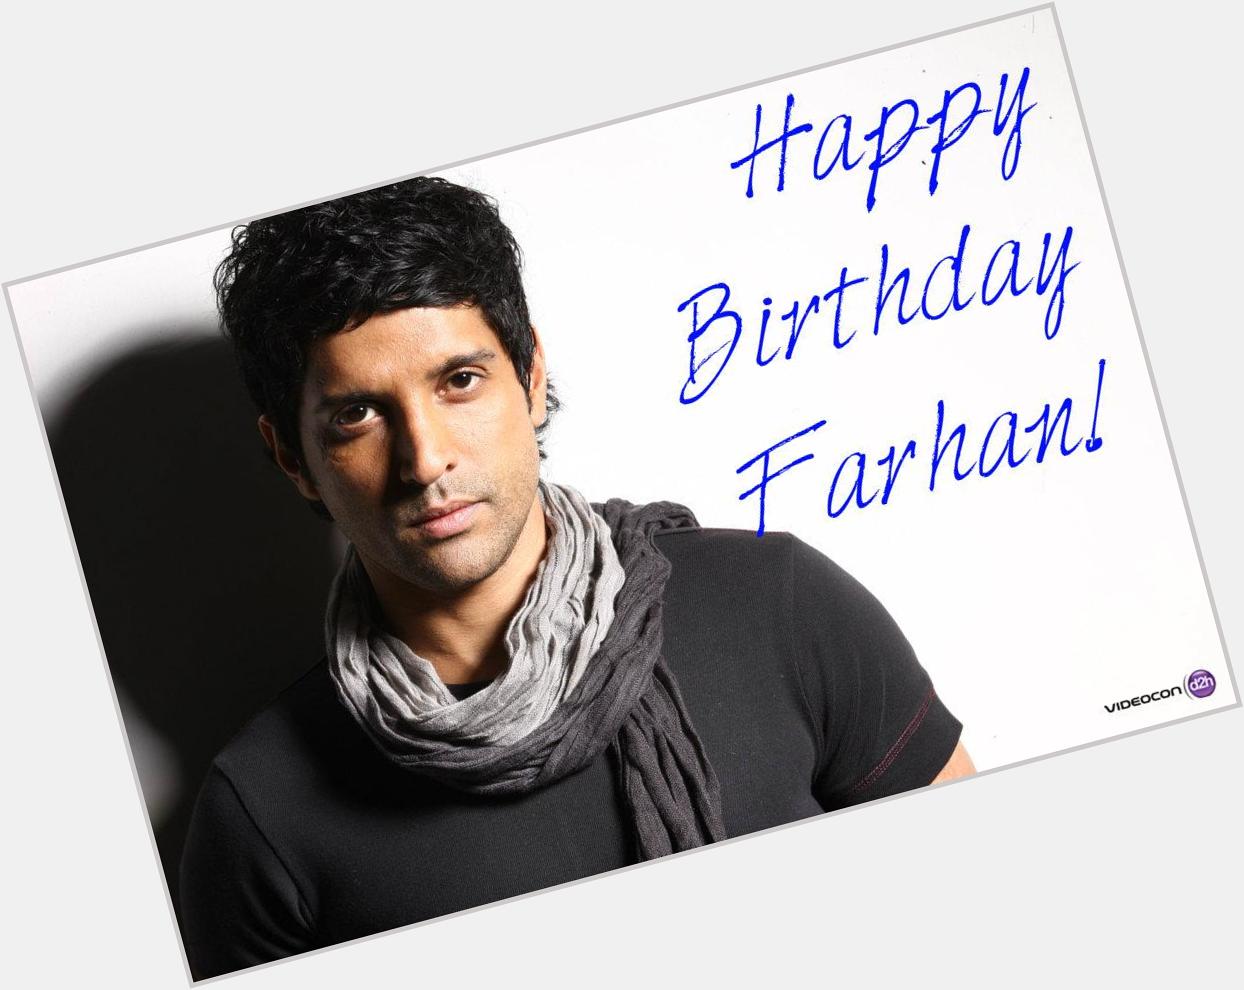 Happy Birthday Farhan Akhtar!
Join us in wishing the Rock On actor and the man of many talents a brilliant year ahead 